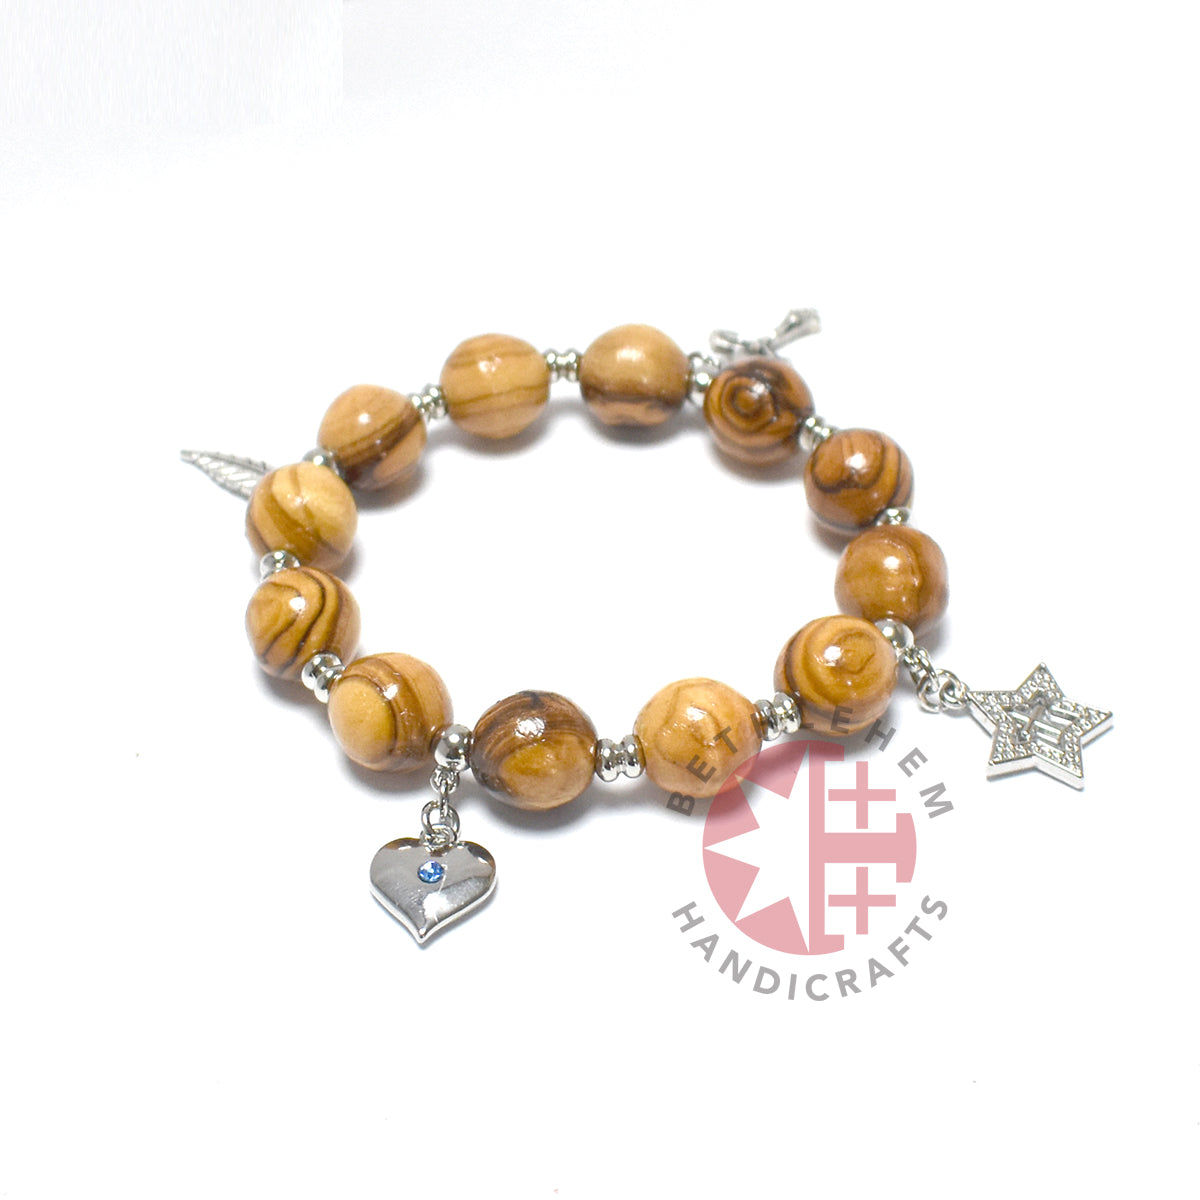 Bracelet with 4 Silver Plated Pendants Wood 12mm Round Beads